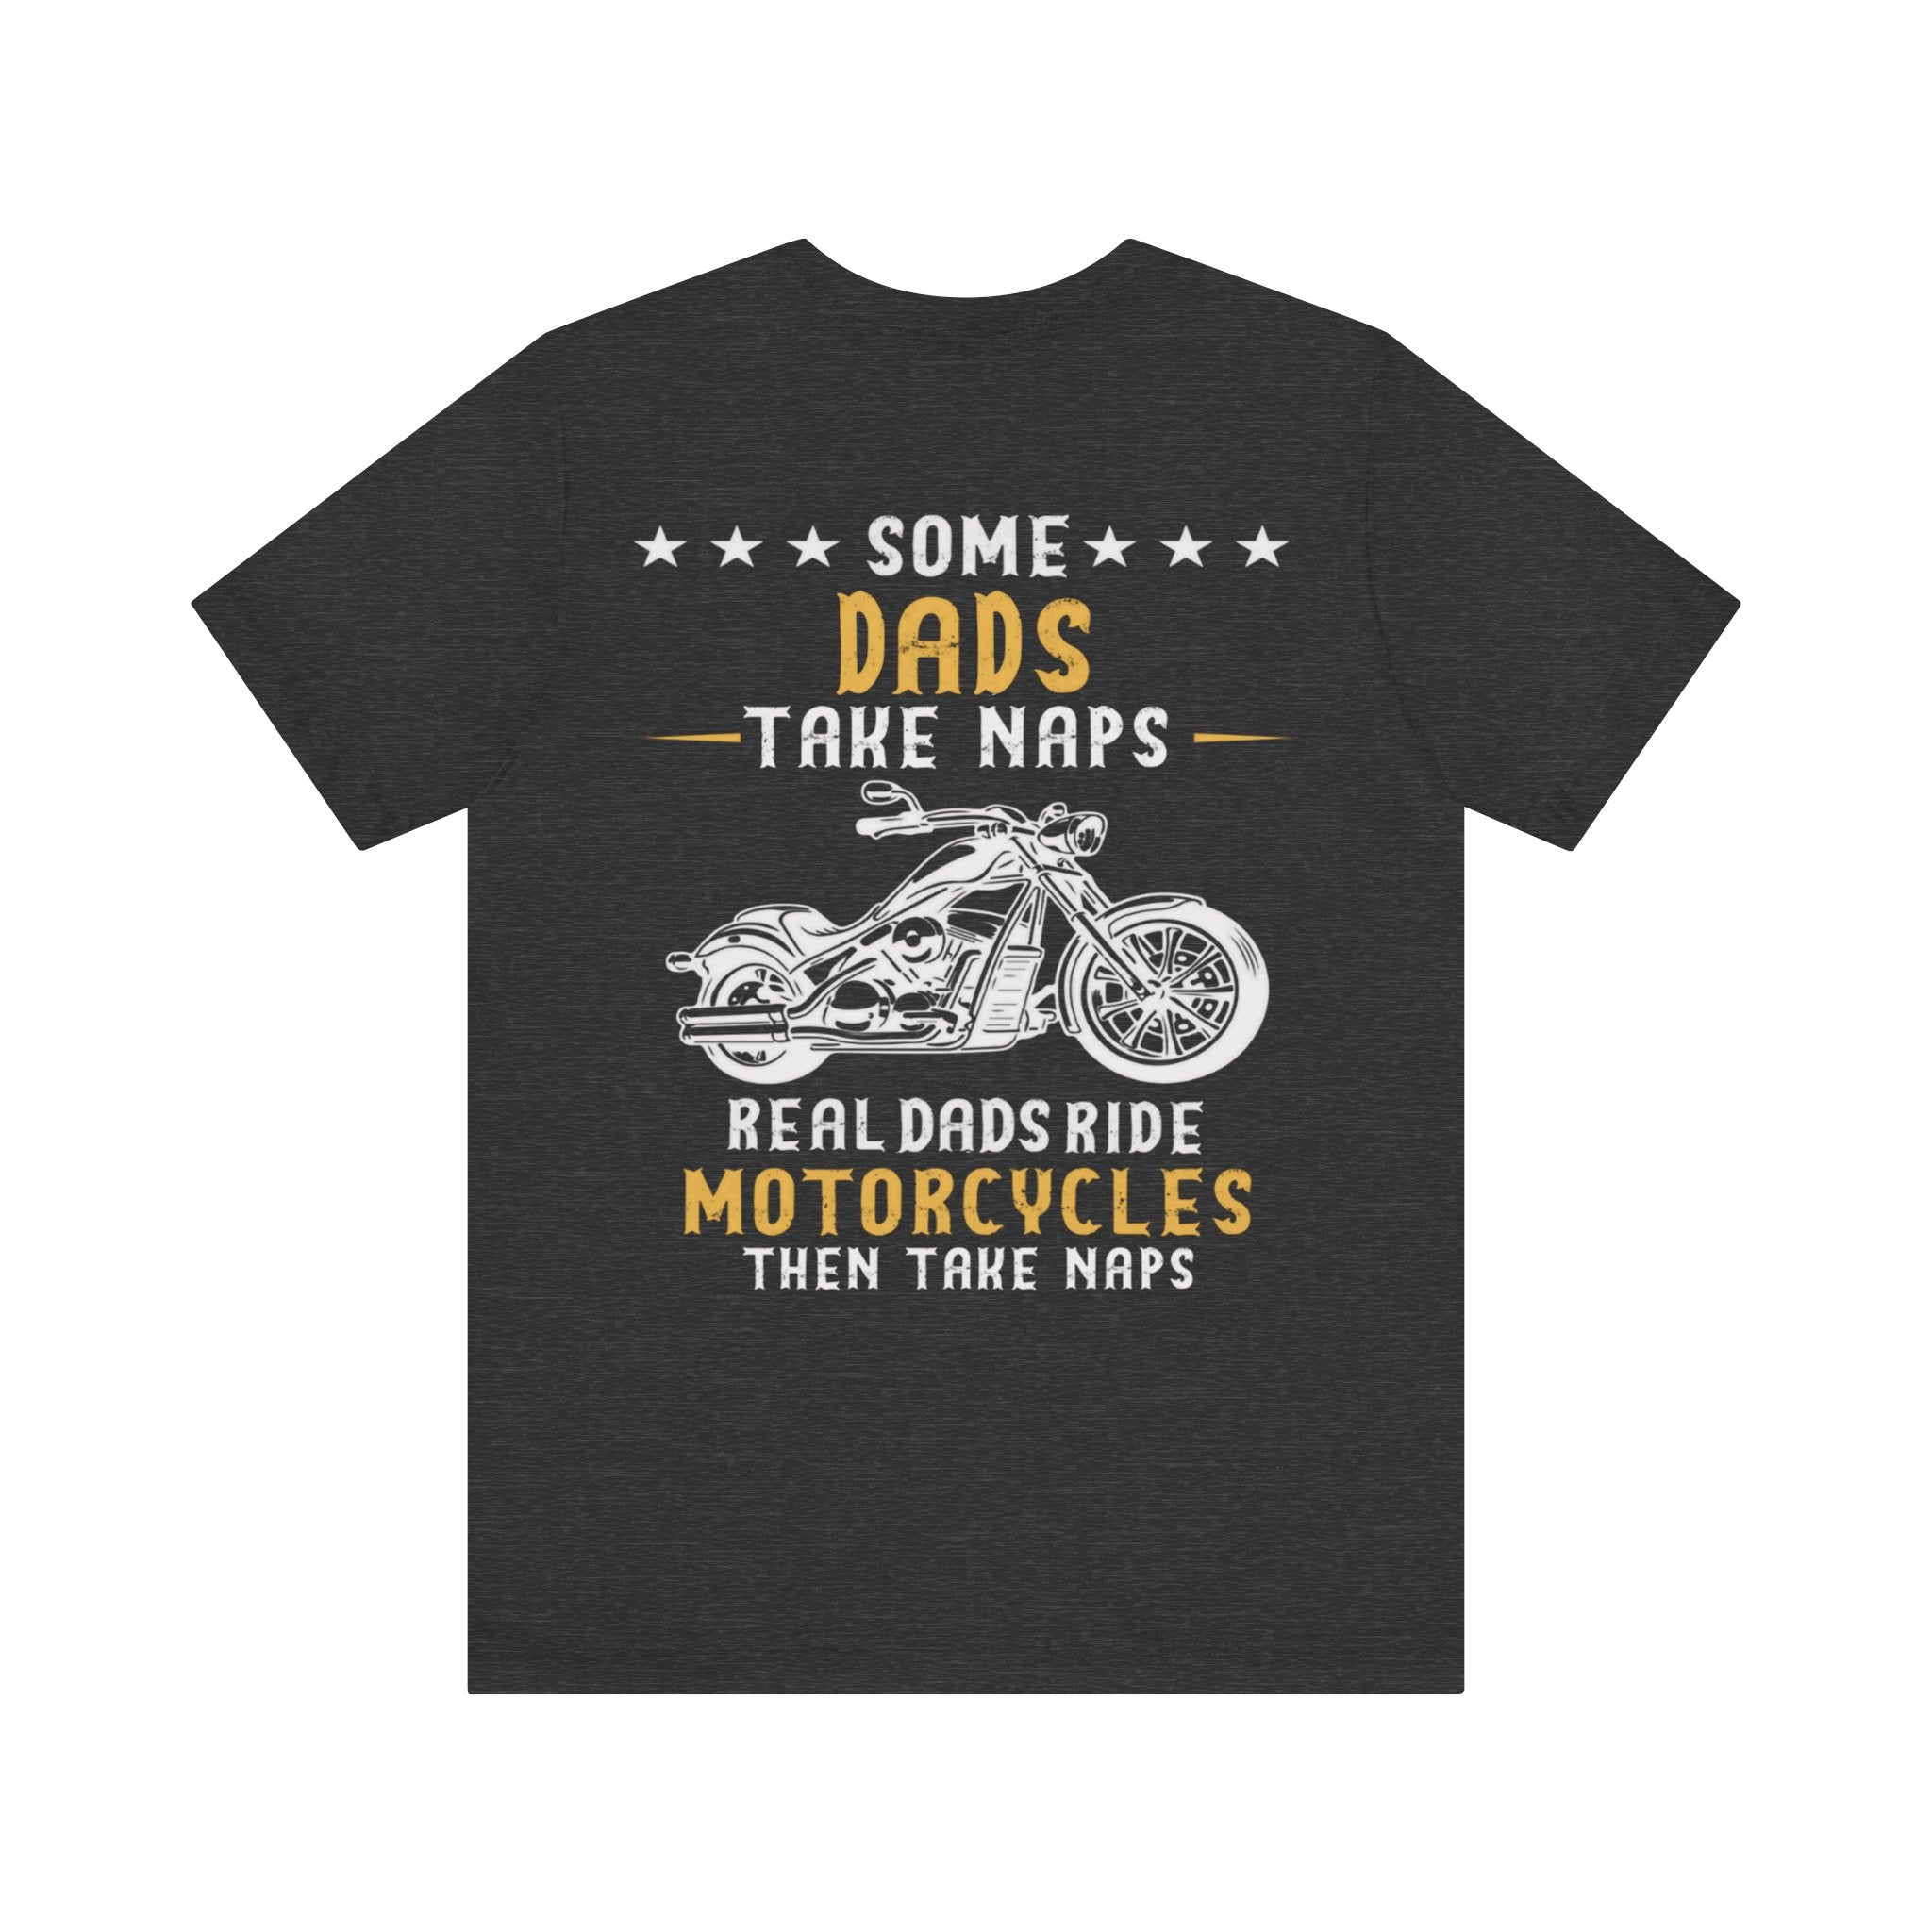 Kate McEnroe New York Biker Dad Shirt For Fathers day, Birthday Gift, Real Dads Ride Motorcycles Then Take Naps Shirt, Funny Biker Shirt, Dad GiftT - Shirt12138605554386810244